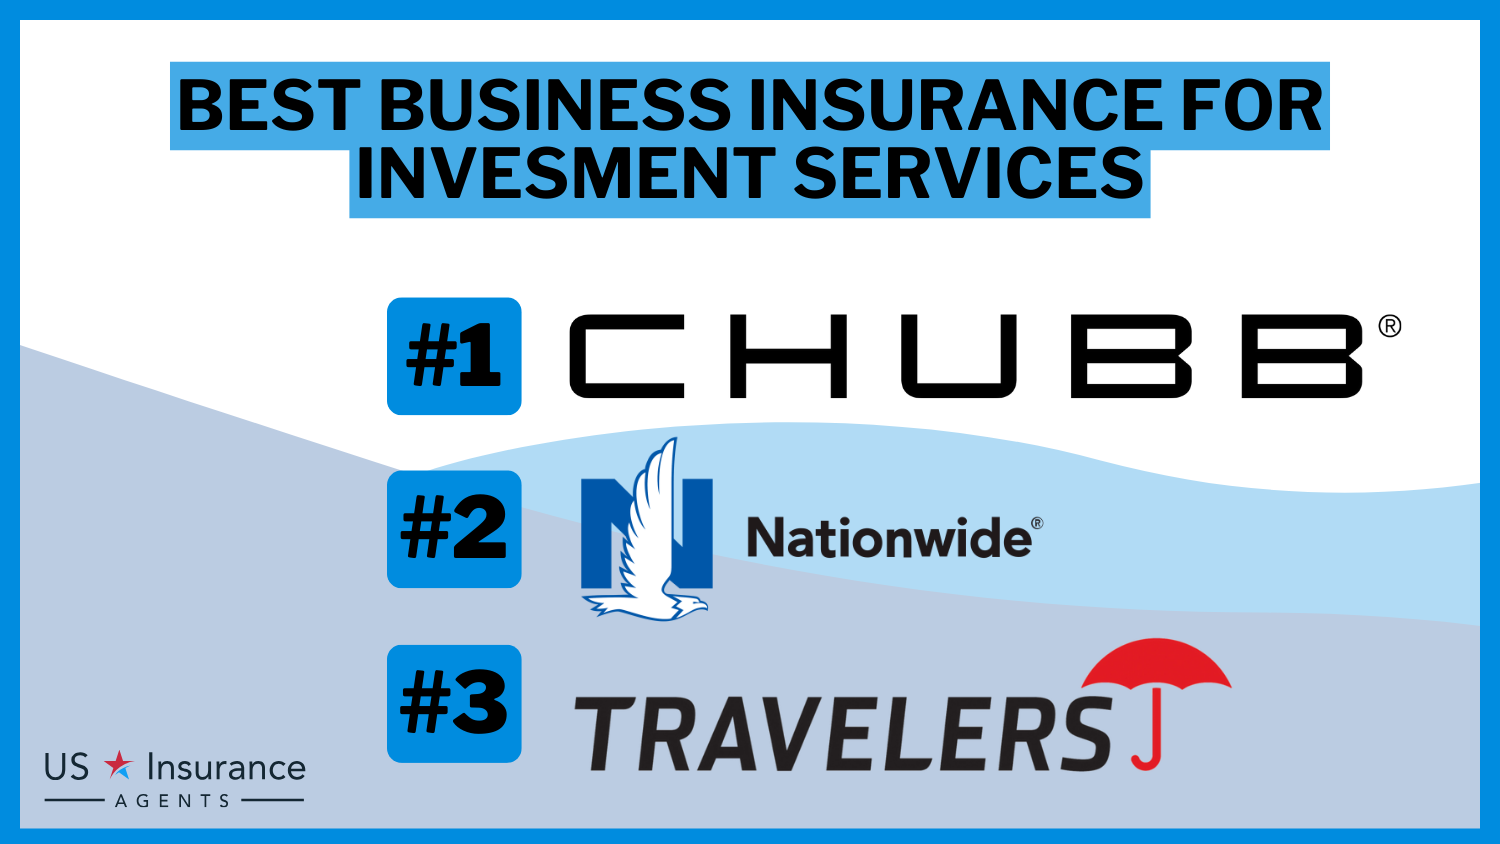 Best Business Insurance for Investment Services: Chubb, Nationwide, and Travelers.